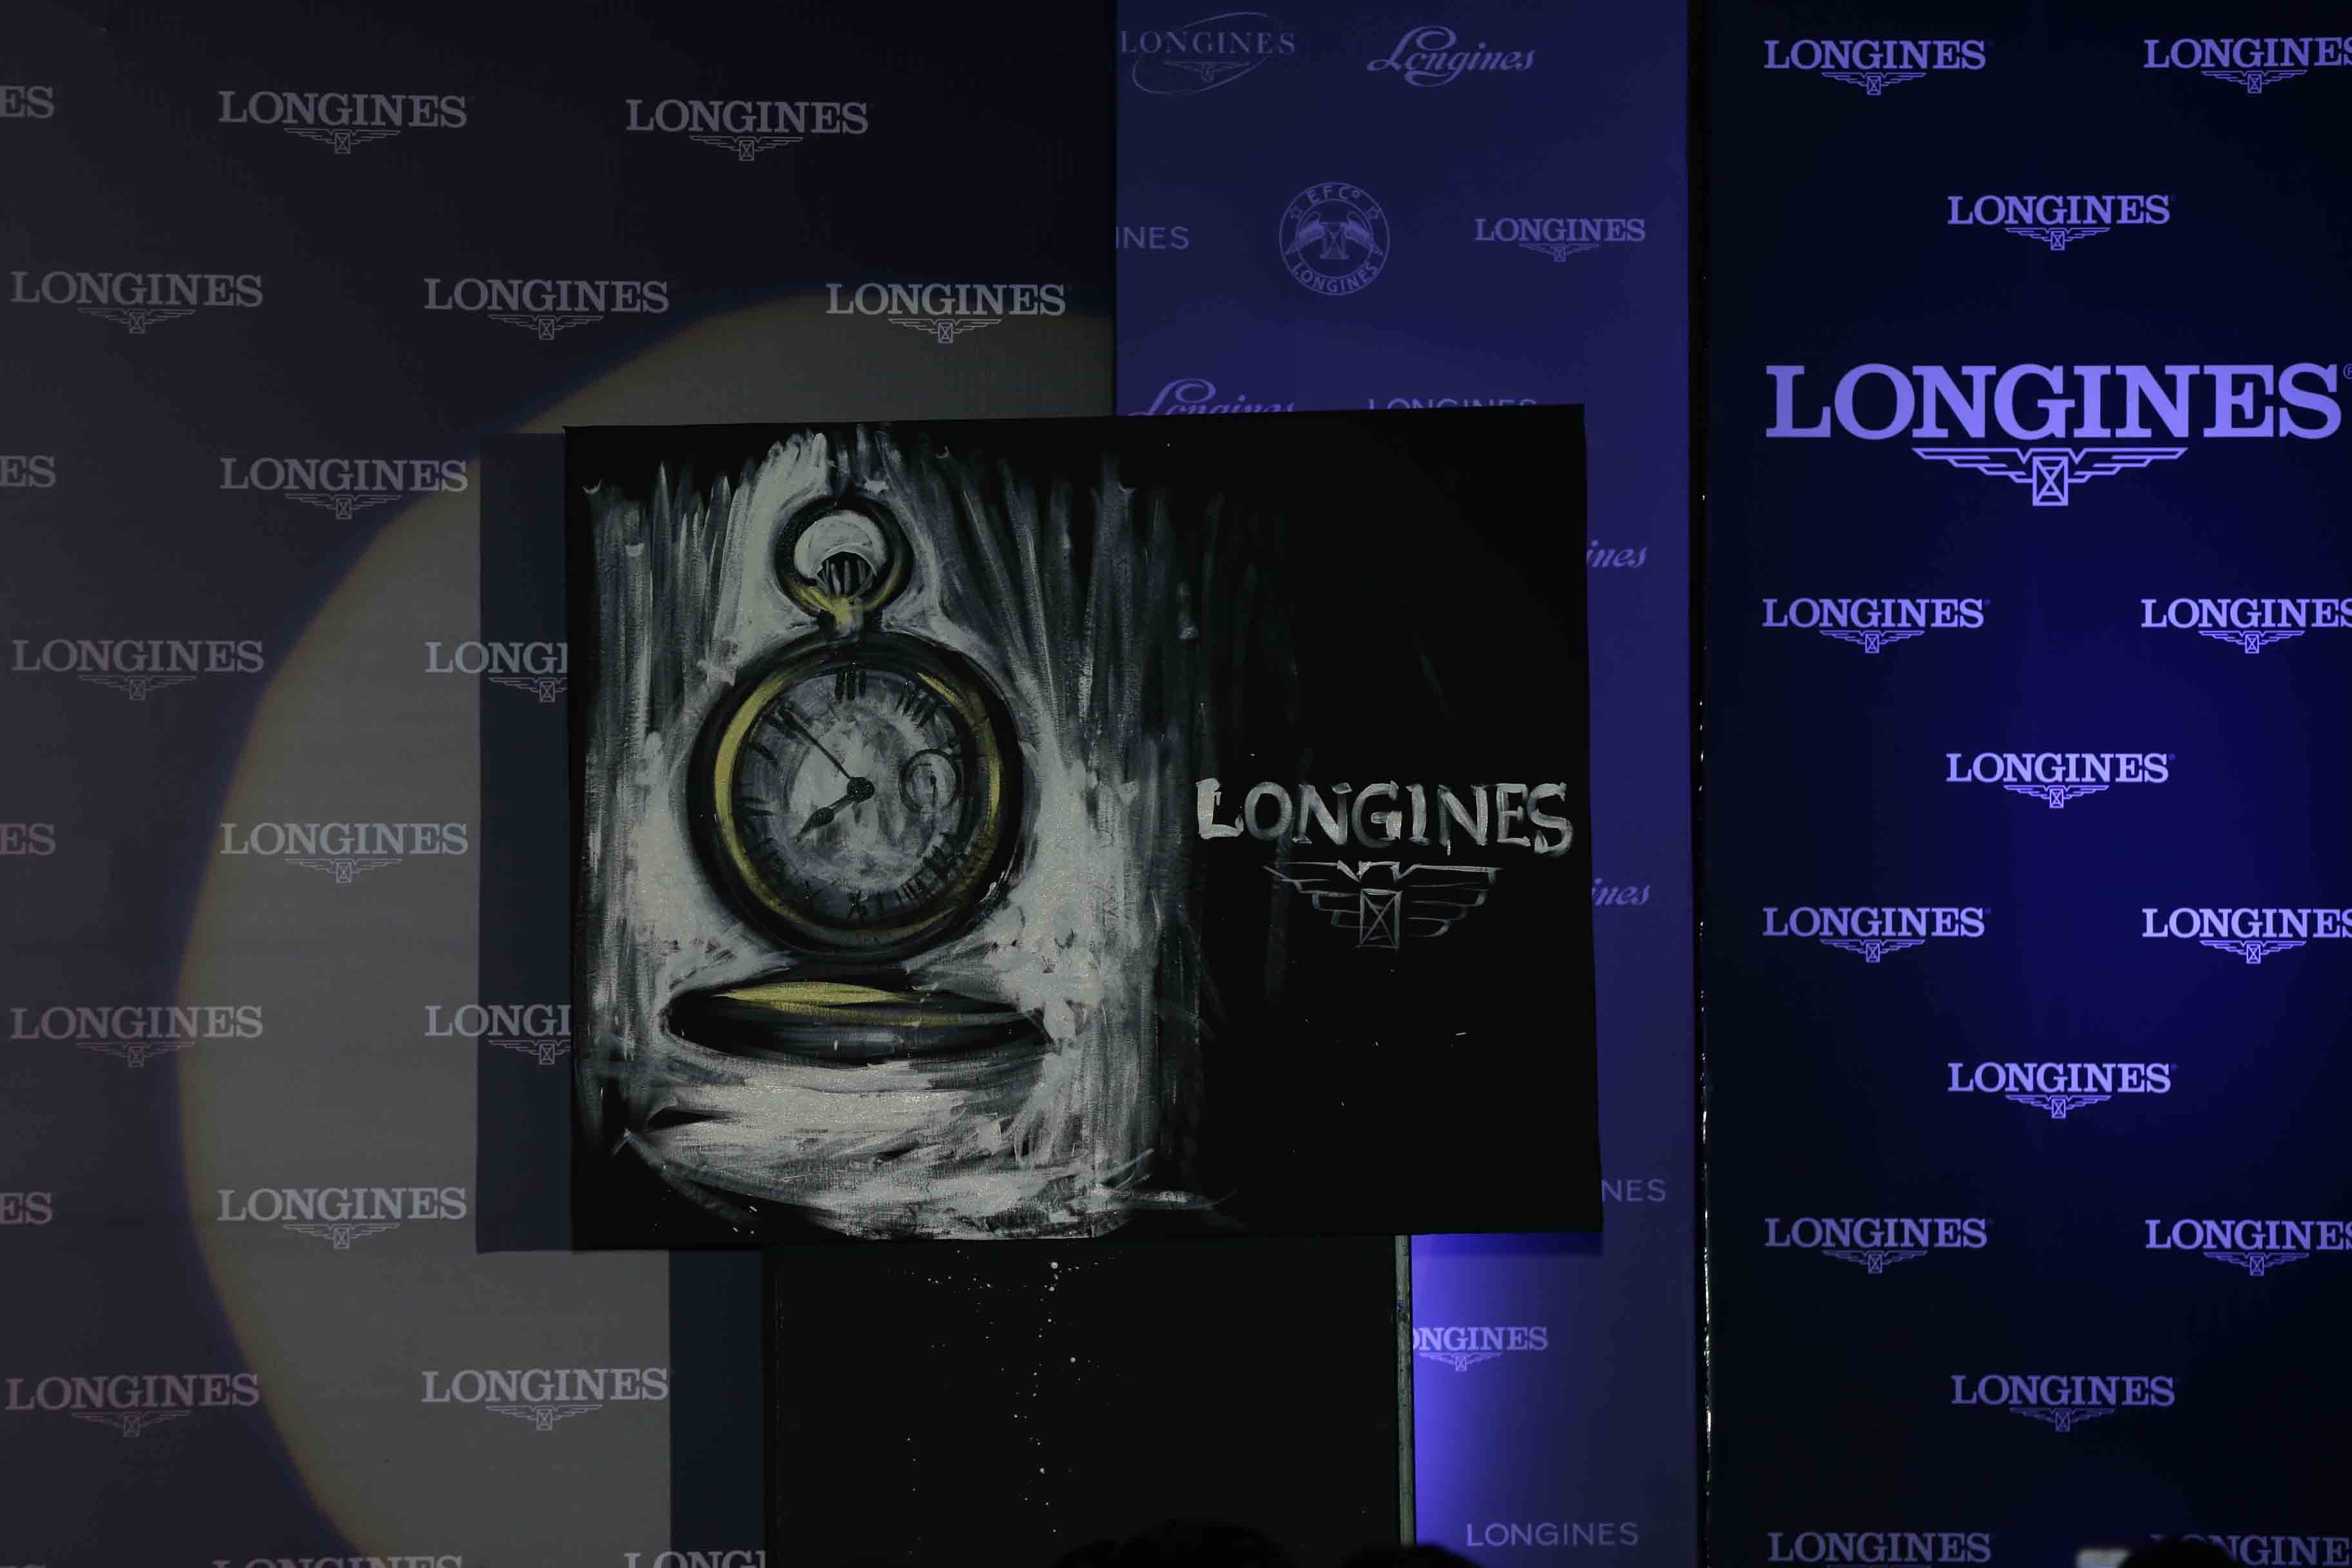 Villas Nayak, Speed painter, with his Painting of the winning watch at Longines event